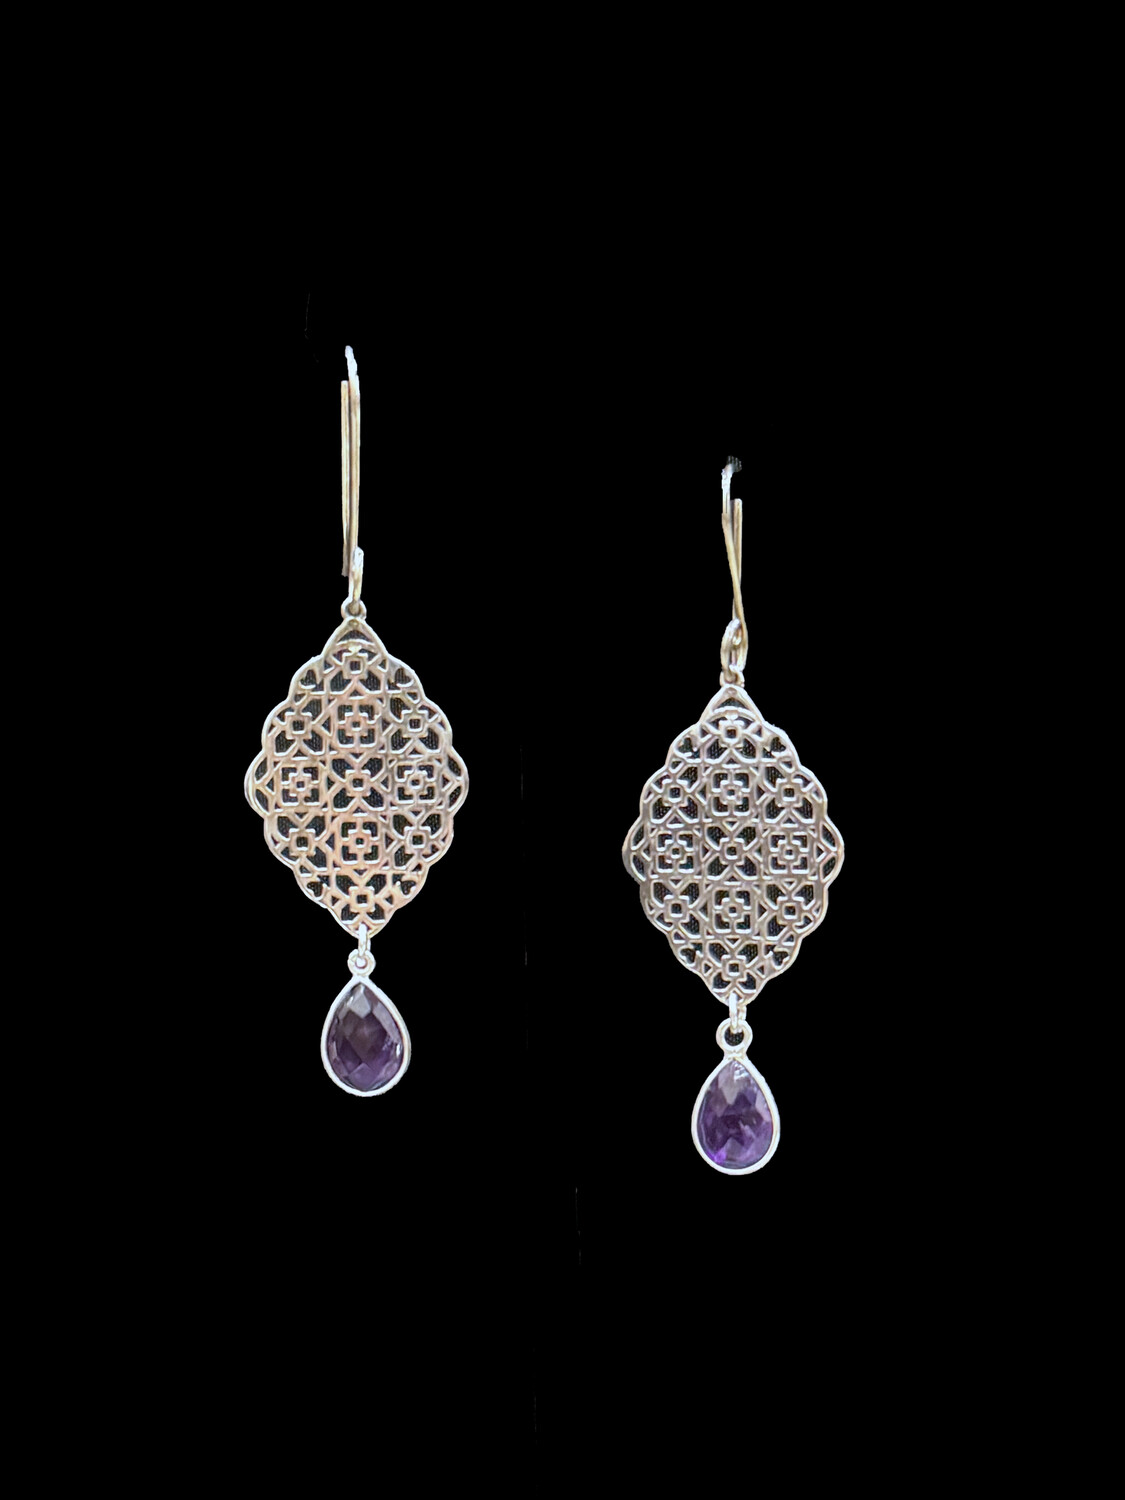 S Curve Earrings with Geometric Arabesque and Cut Stone Drop